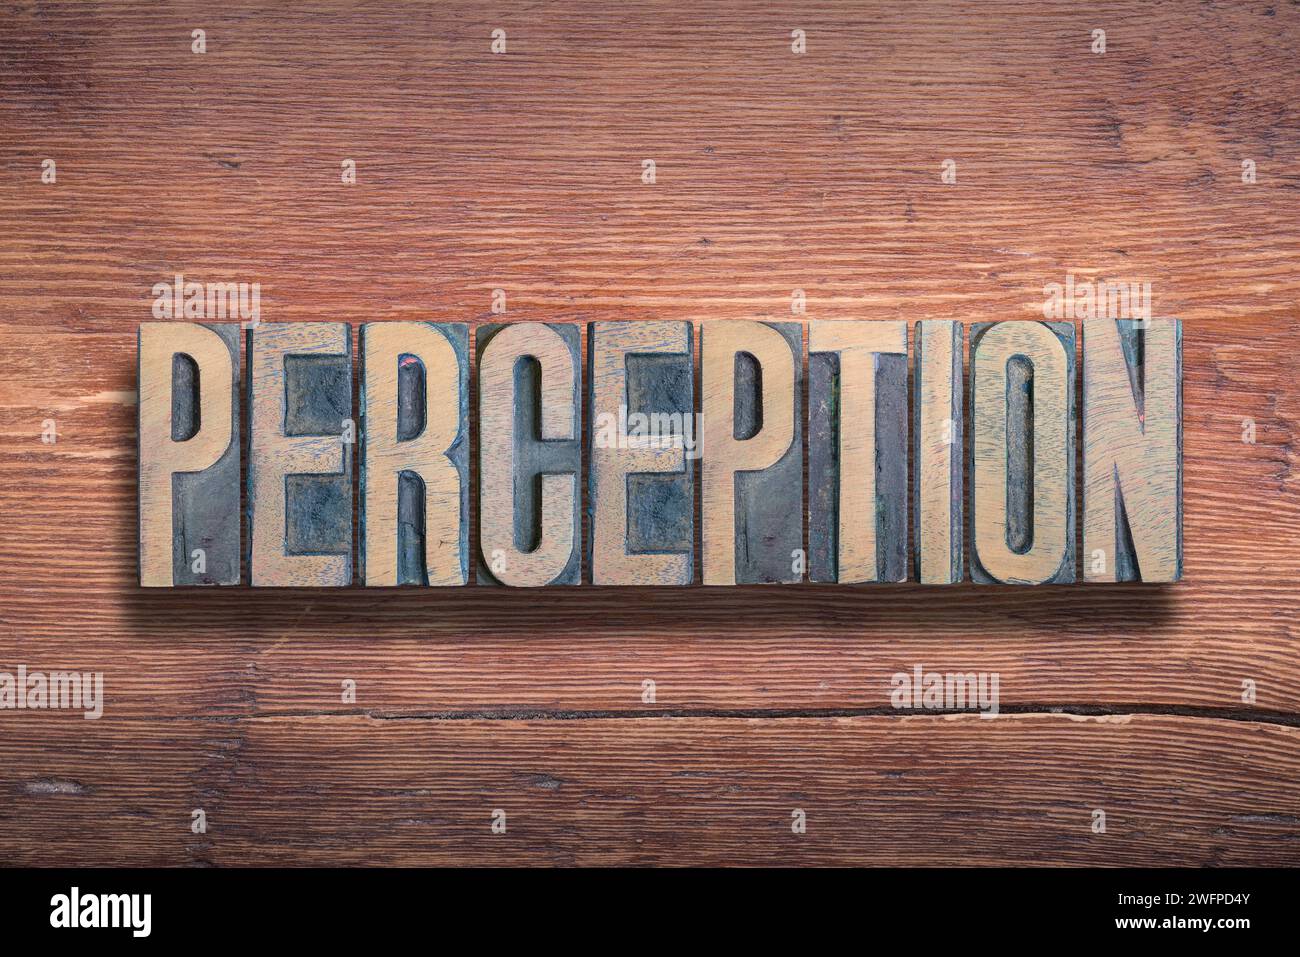 perception word combined on vintage varnished wooden surface Stock Photo